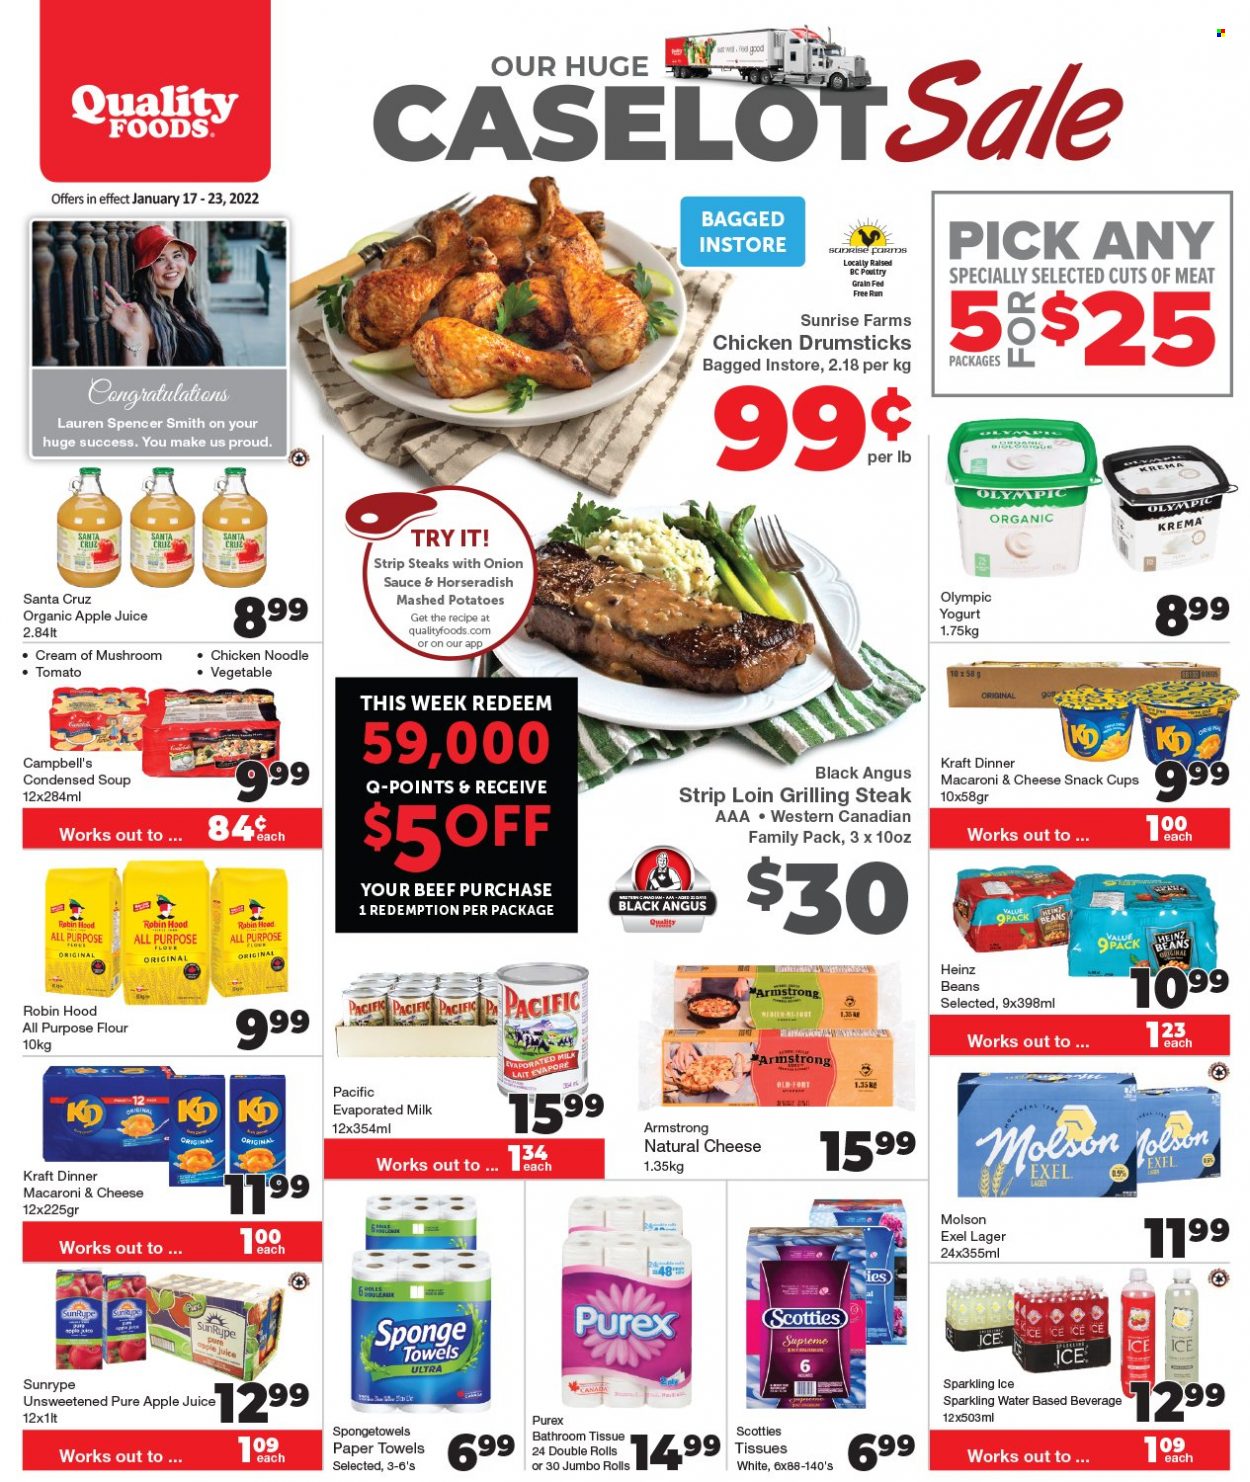 thumbnail - Quality Foods Flyer - January 17, 2022 - January 23, 2022 - Sales products - beans, horseradish, Campbell's, macaroni & cheese, mashed potatoes, condensed soup, soup, noodles, instant soup, Kraft®, yoghurt, evaporated milk, snack, all purpose flour, flour, apple juice, juice, sparkling water, beer, Lager, chicken drumsticks, chicken, beef meat, striploin steak, bath tissue, kitchen towels, paper towels, Purex, sponge, cup, Heinz, steak. Page 1.